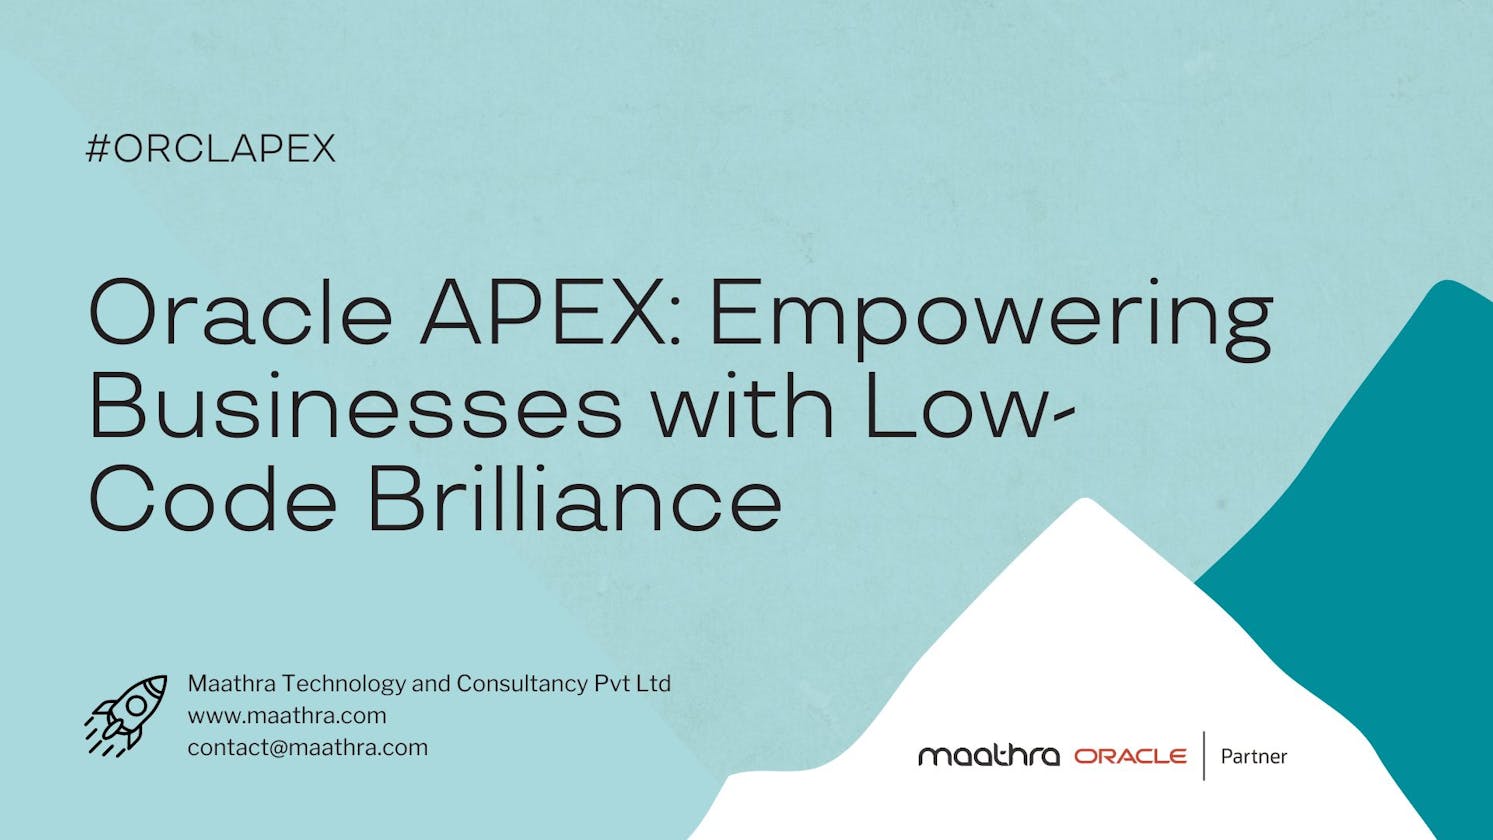 Oracle APEX: Empowering Businesses with Low-Code Brilliance